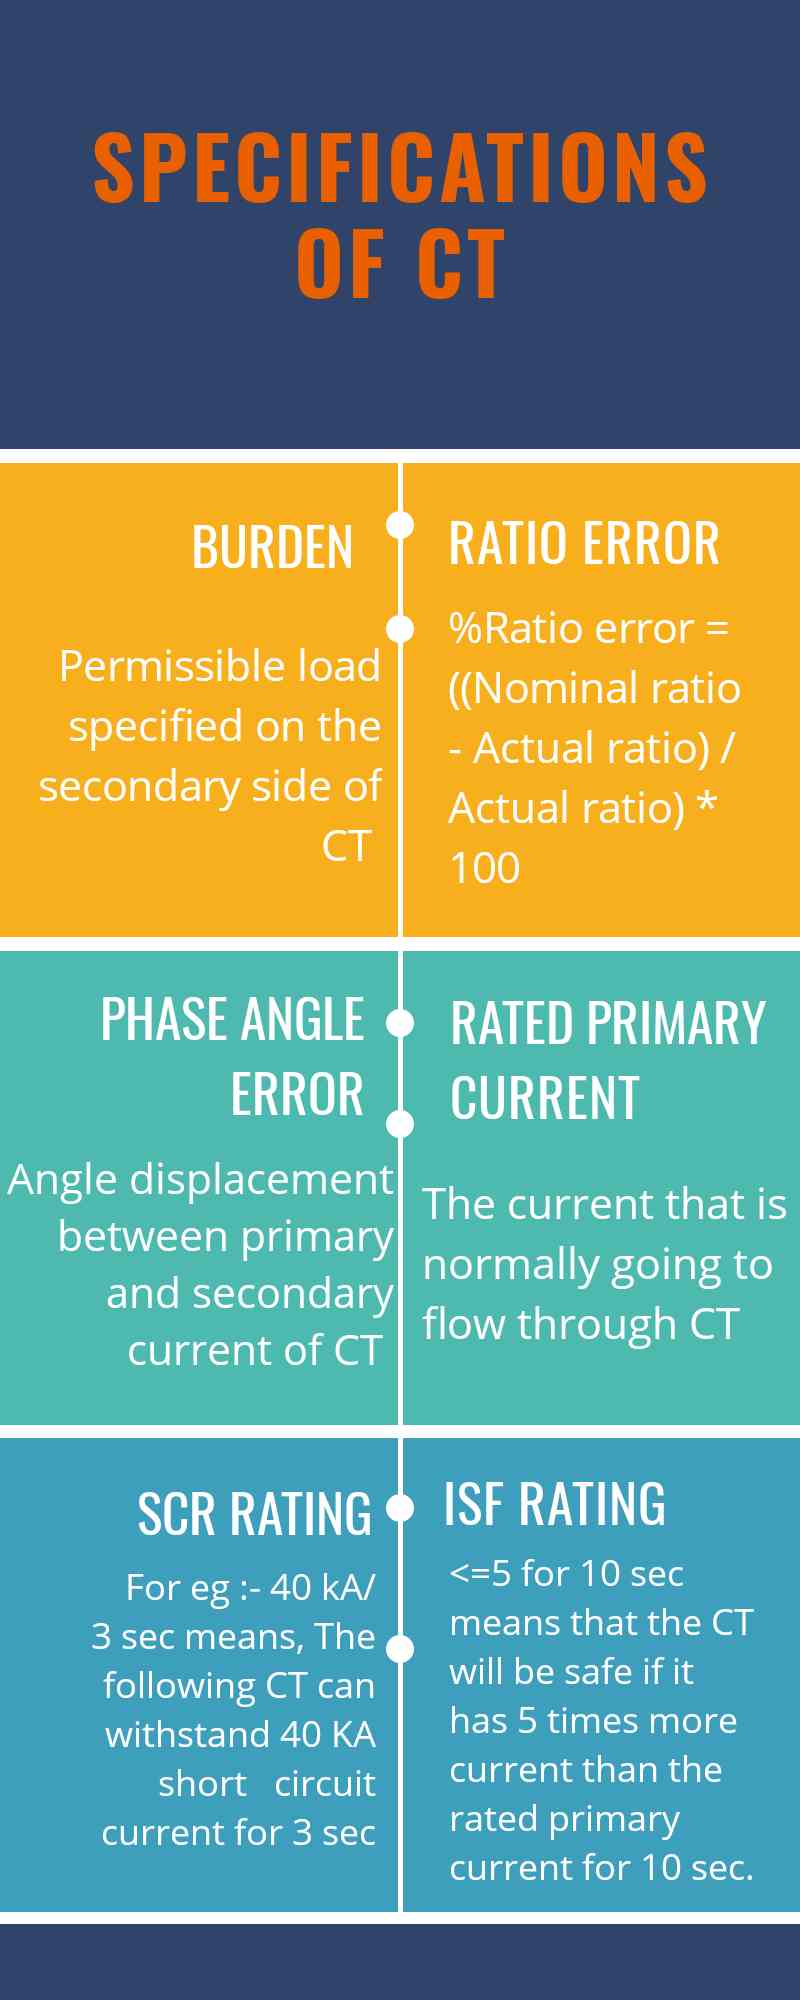 Learn about Specifications of CT's like Burden, Ratio and phase error, SCR rating, etc